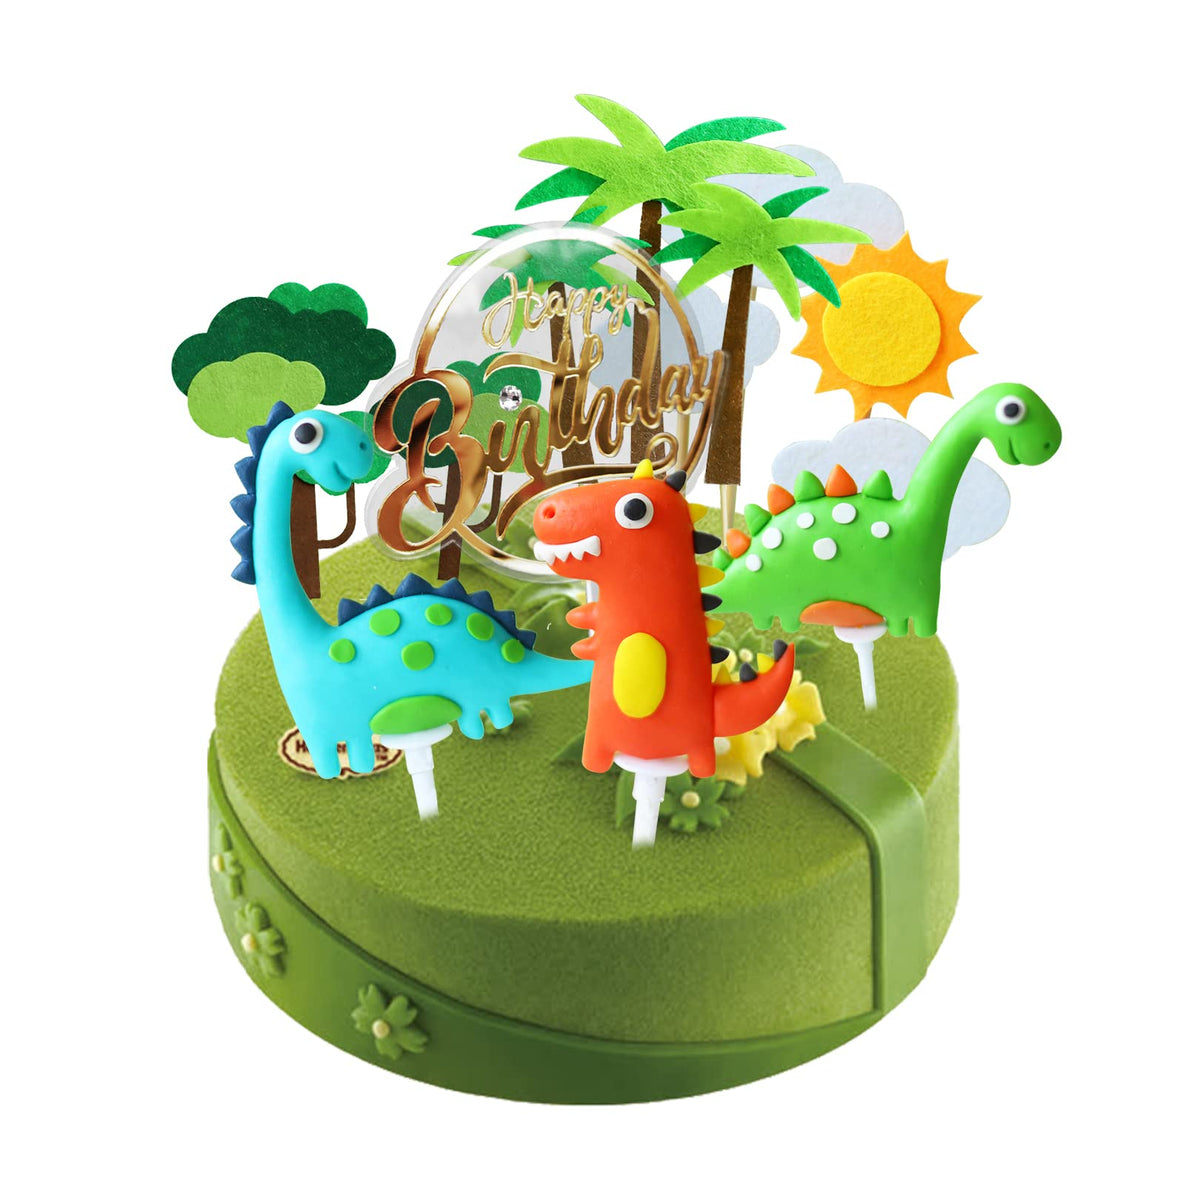 13PCS Cake Toppers, 3D Dinosaur Cake Toppers Decorations, Happy Birthday Cake Toppers Cupcake Topper Cake Decorations Boy Girl Kids Dinosaur Themed Party Decorations Birthday Party Supplies